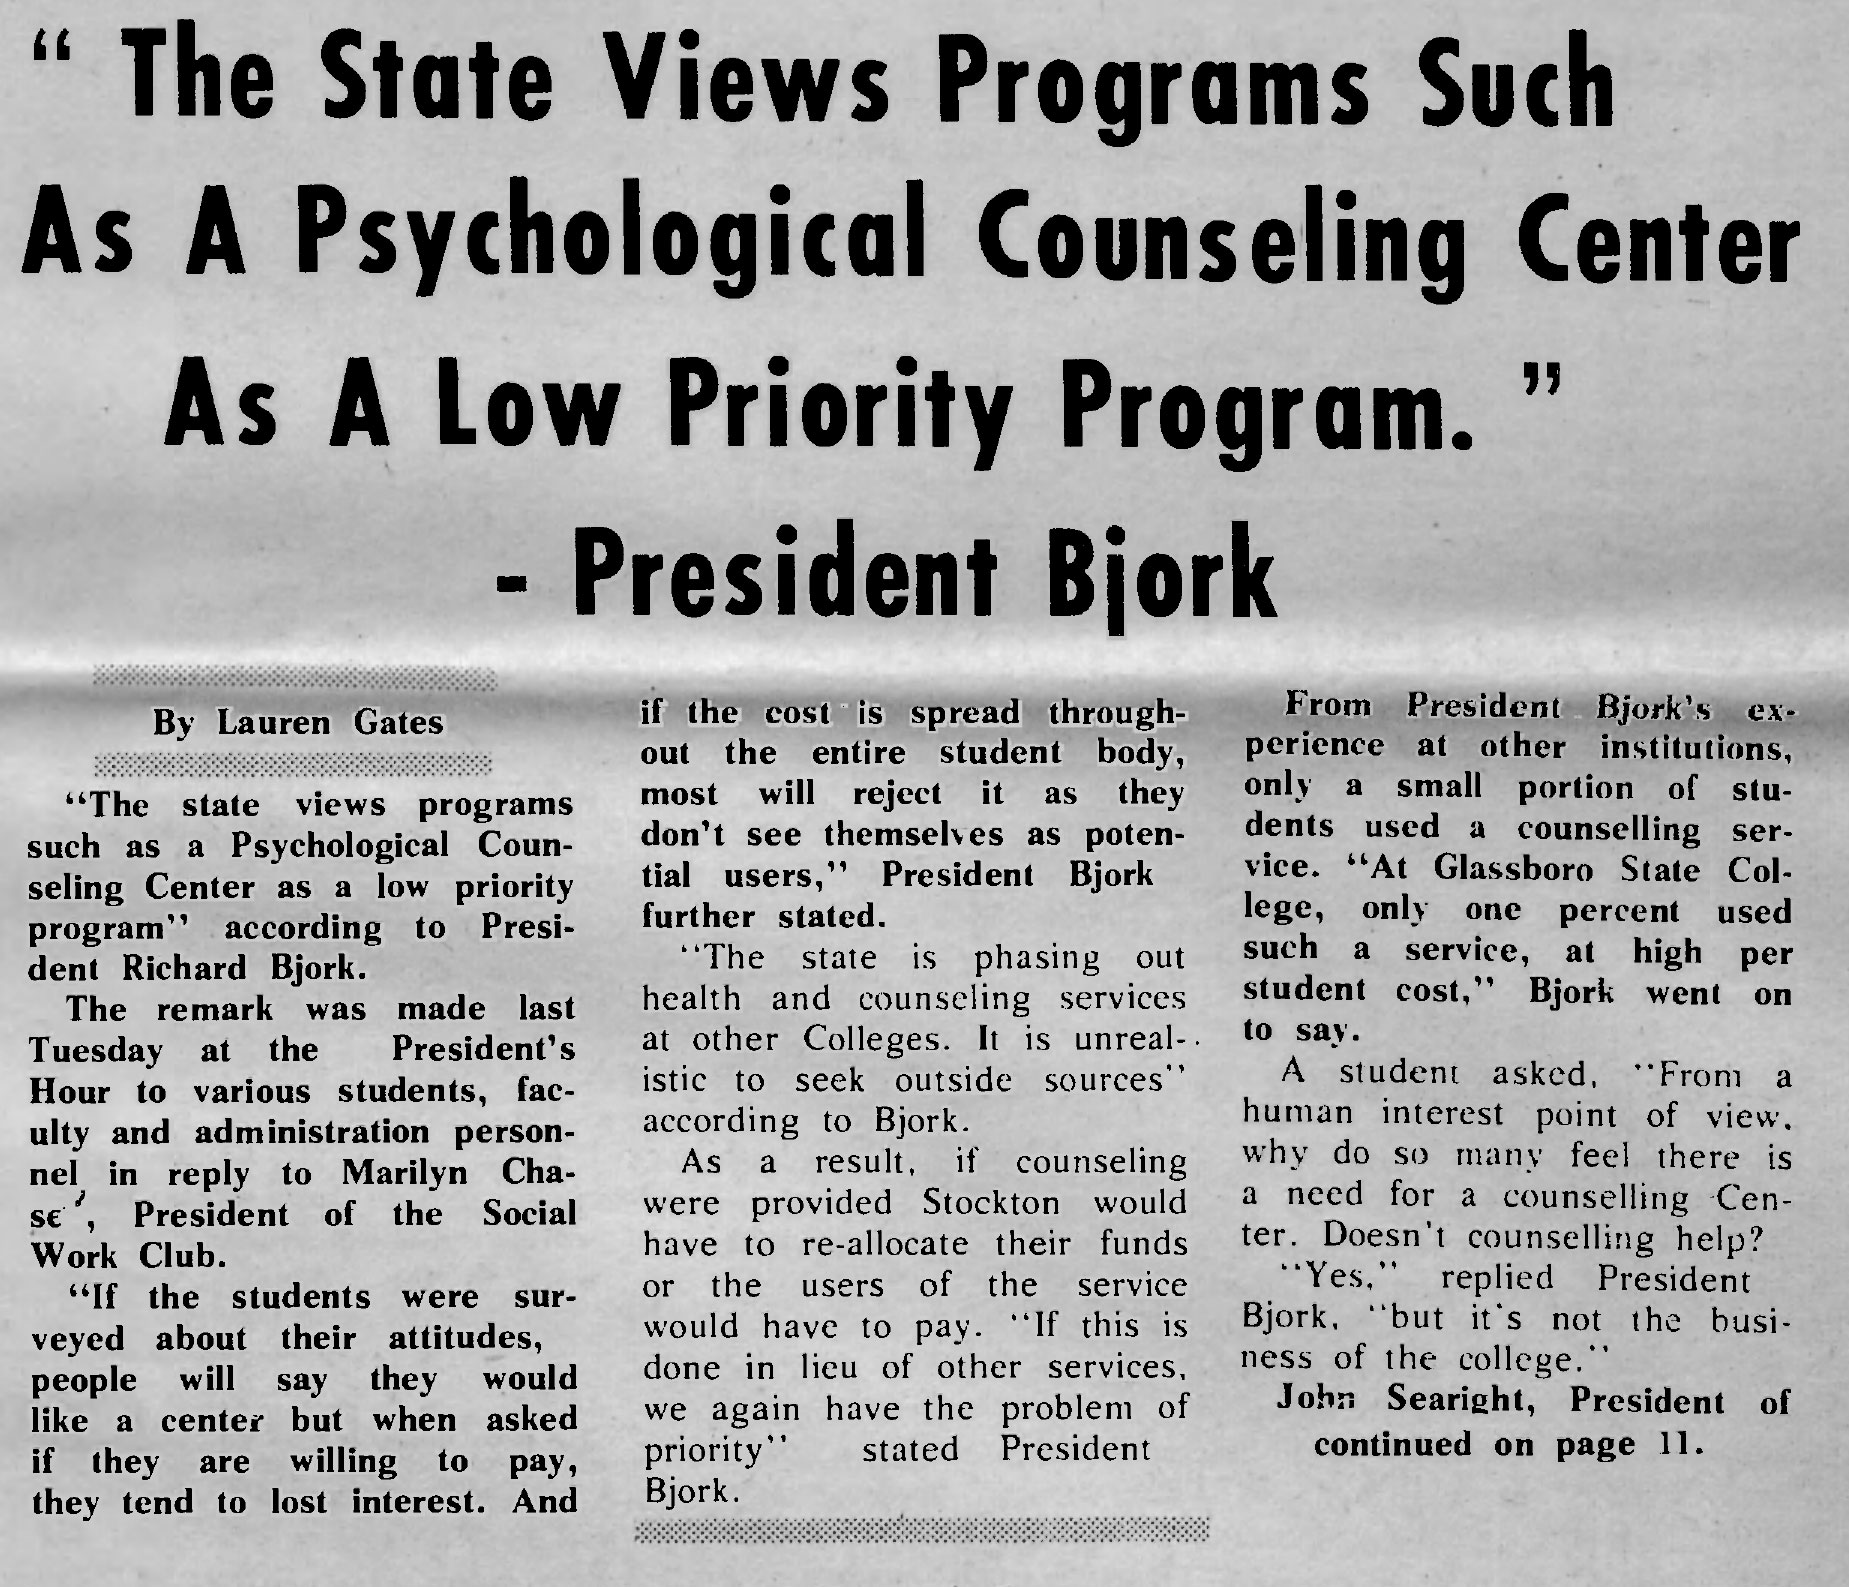 "The state views programs such as a psychological counseling center as a low priority problem."